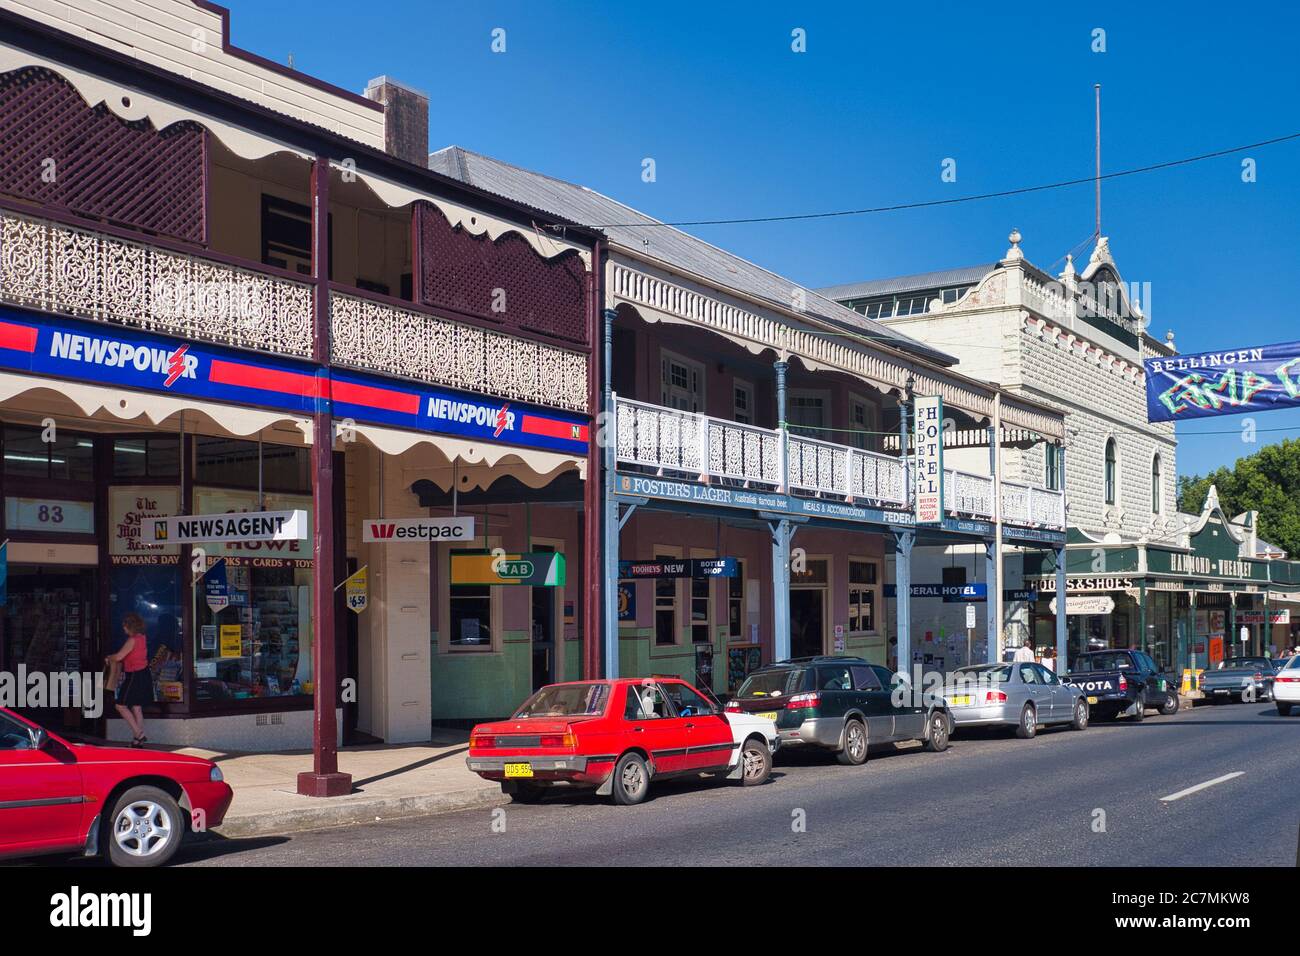 Typical early 1900's architecture of covered walkways and wrought iron decorative balconies in the country town of Bellingen, mid NSW., Australia Stock Photo